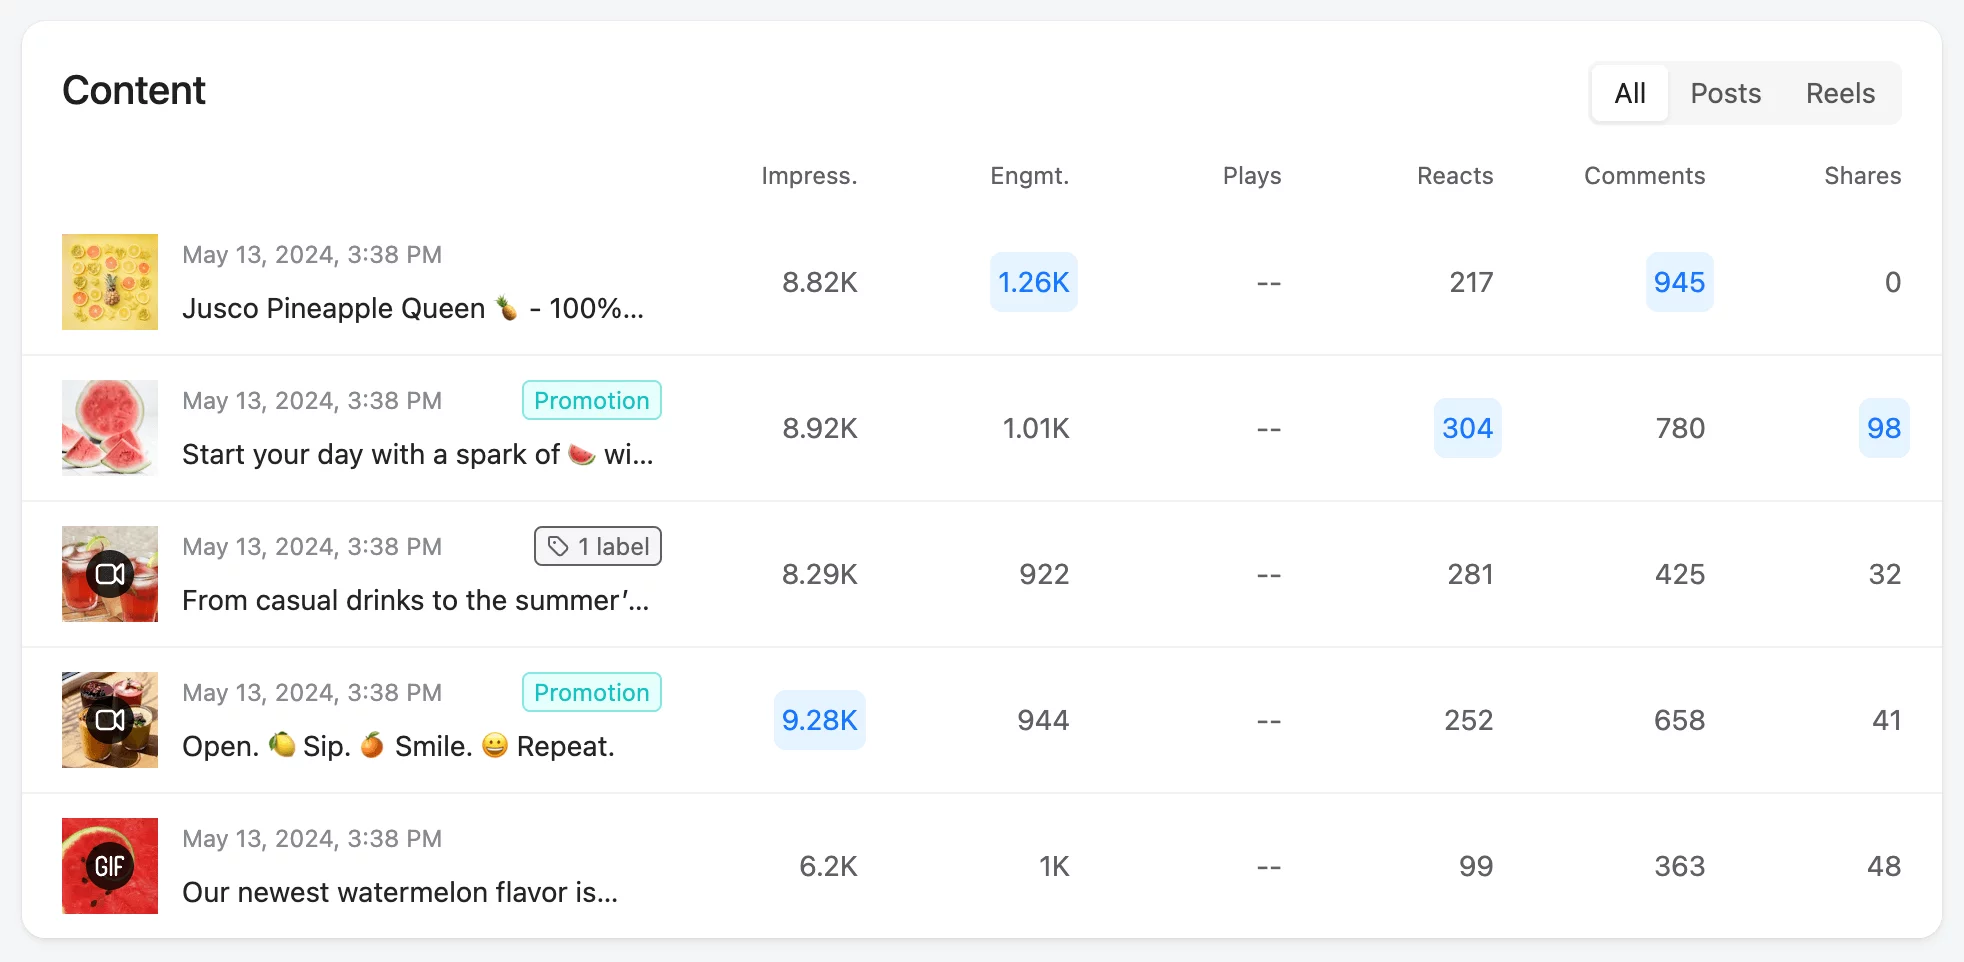 detailed table with posts, and analytics metrics such as impressions, engagement, plays, reacts, comments, and shares